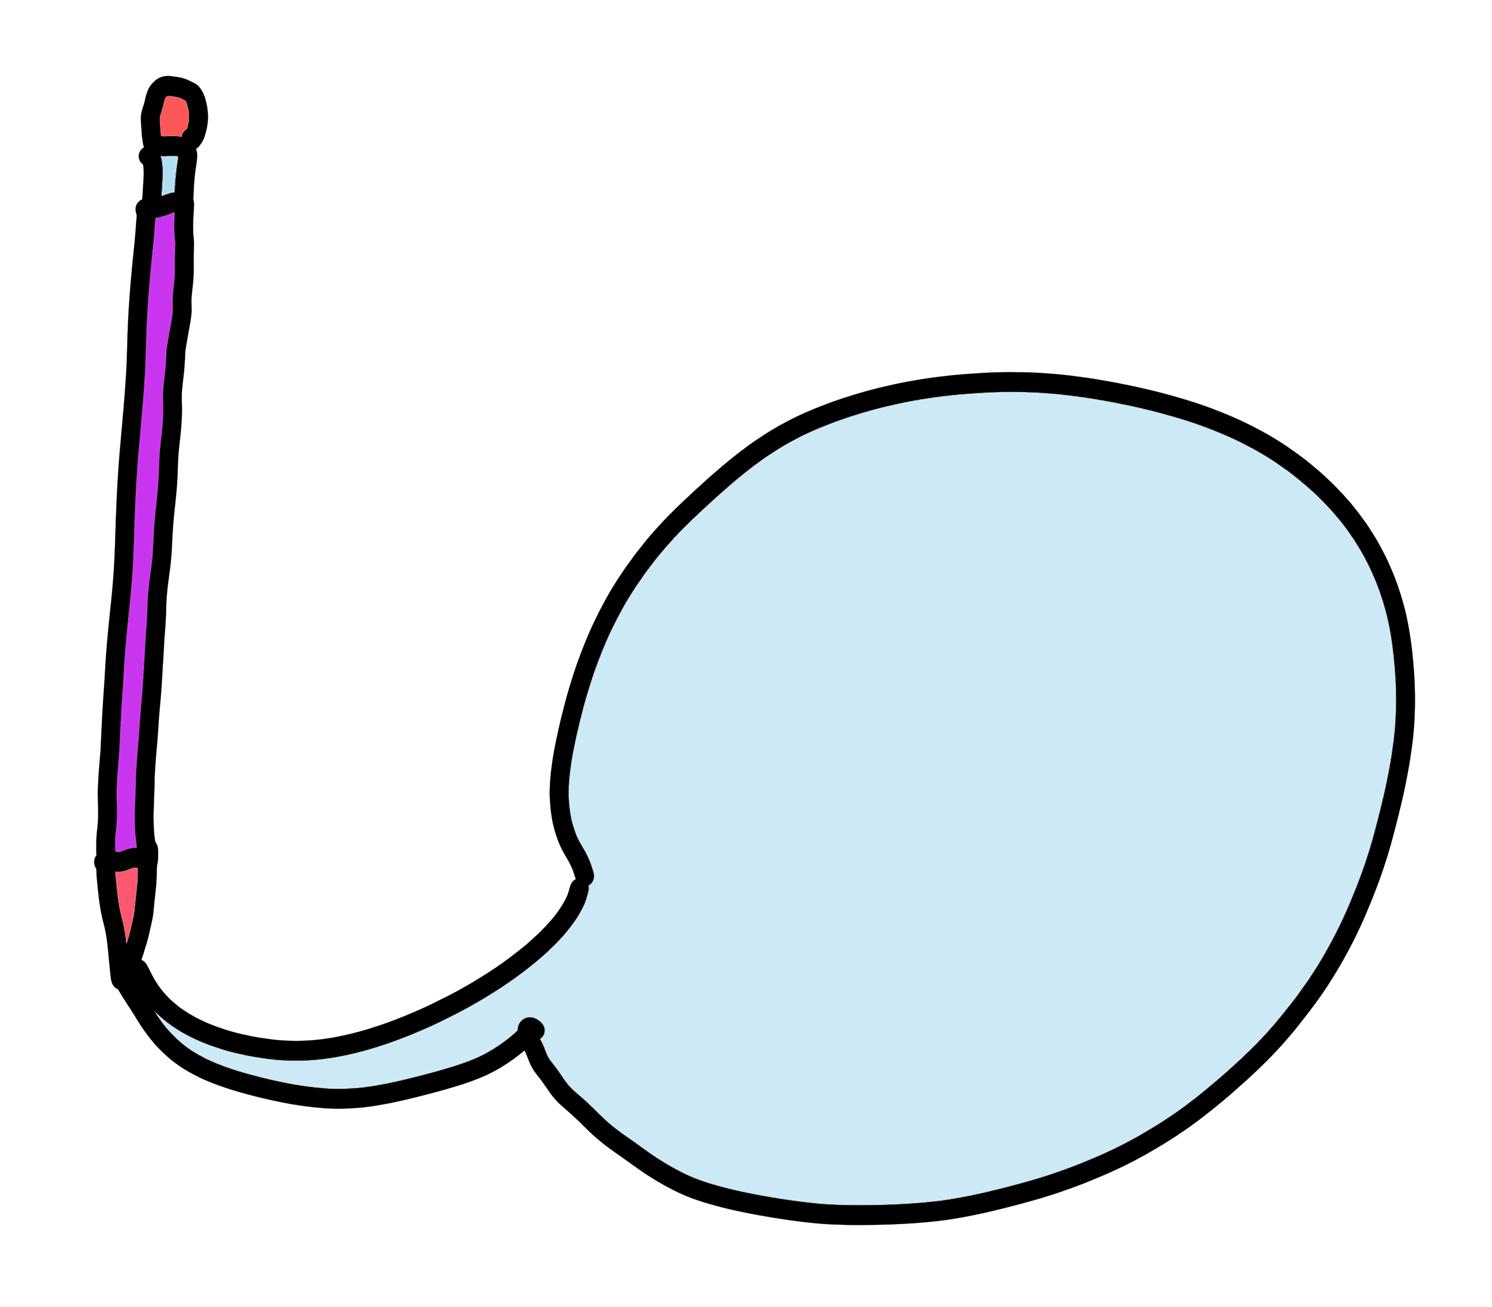 A simple illustration shows a purple pencil with a speech bubble emerging from its tip.